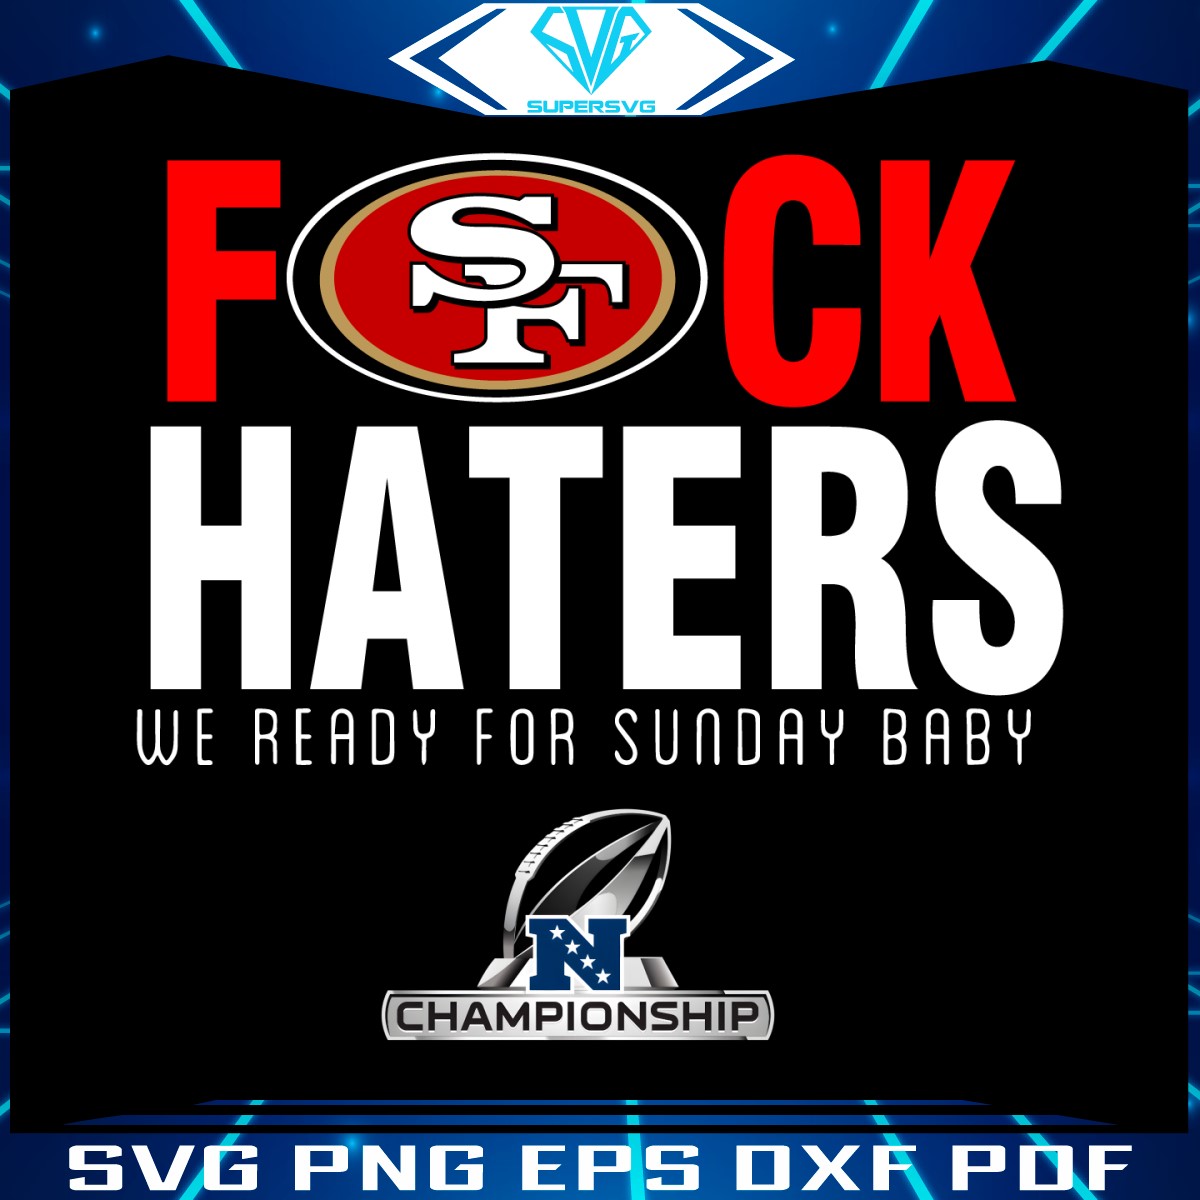 49ers-fuck-haters-we-ready-for-sunday-baby-png